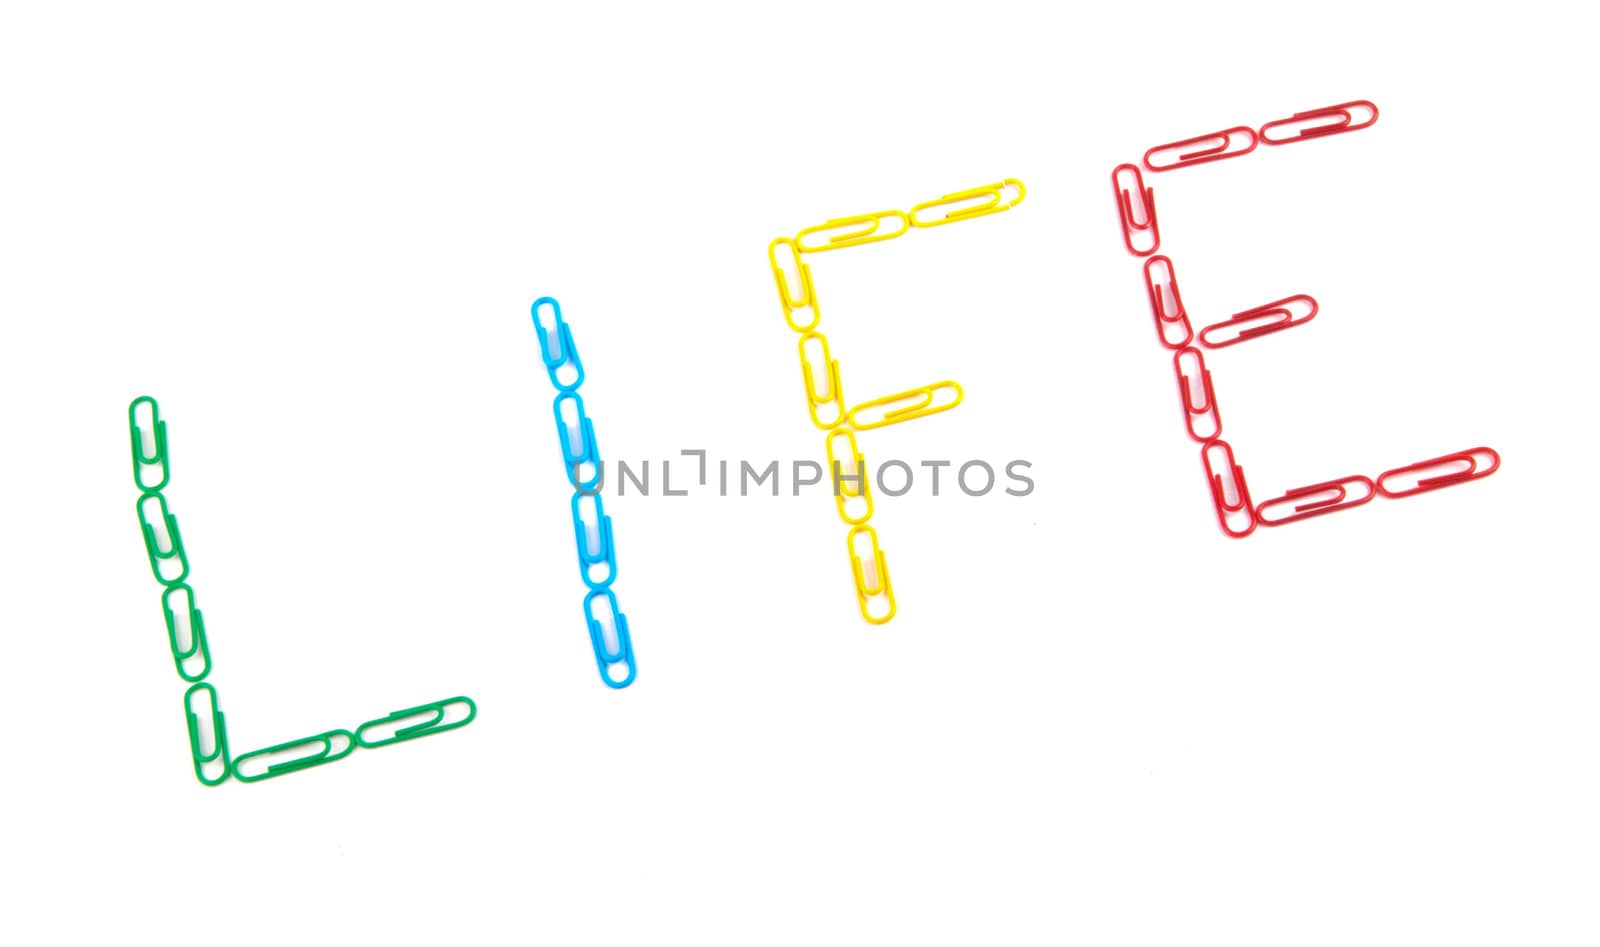 word "life" made with multicolored paper clips by shutswis